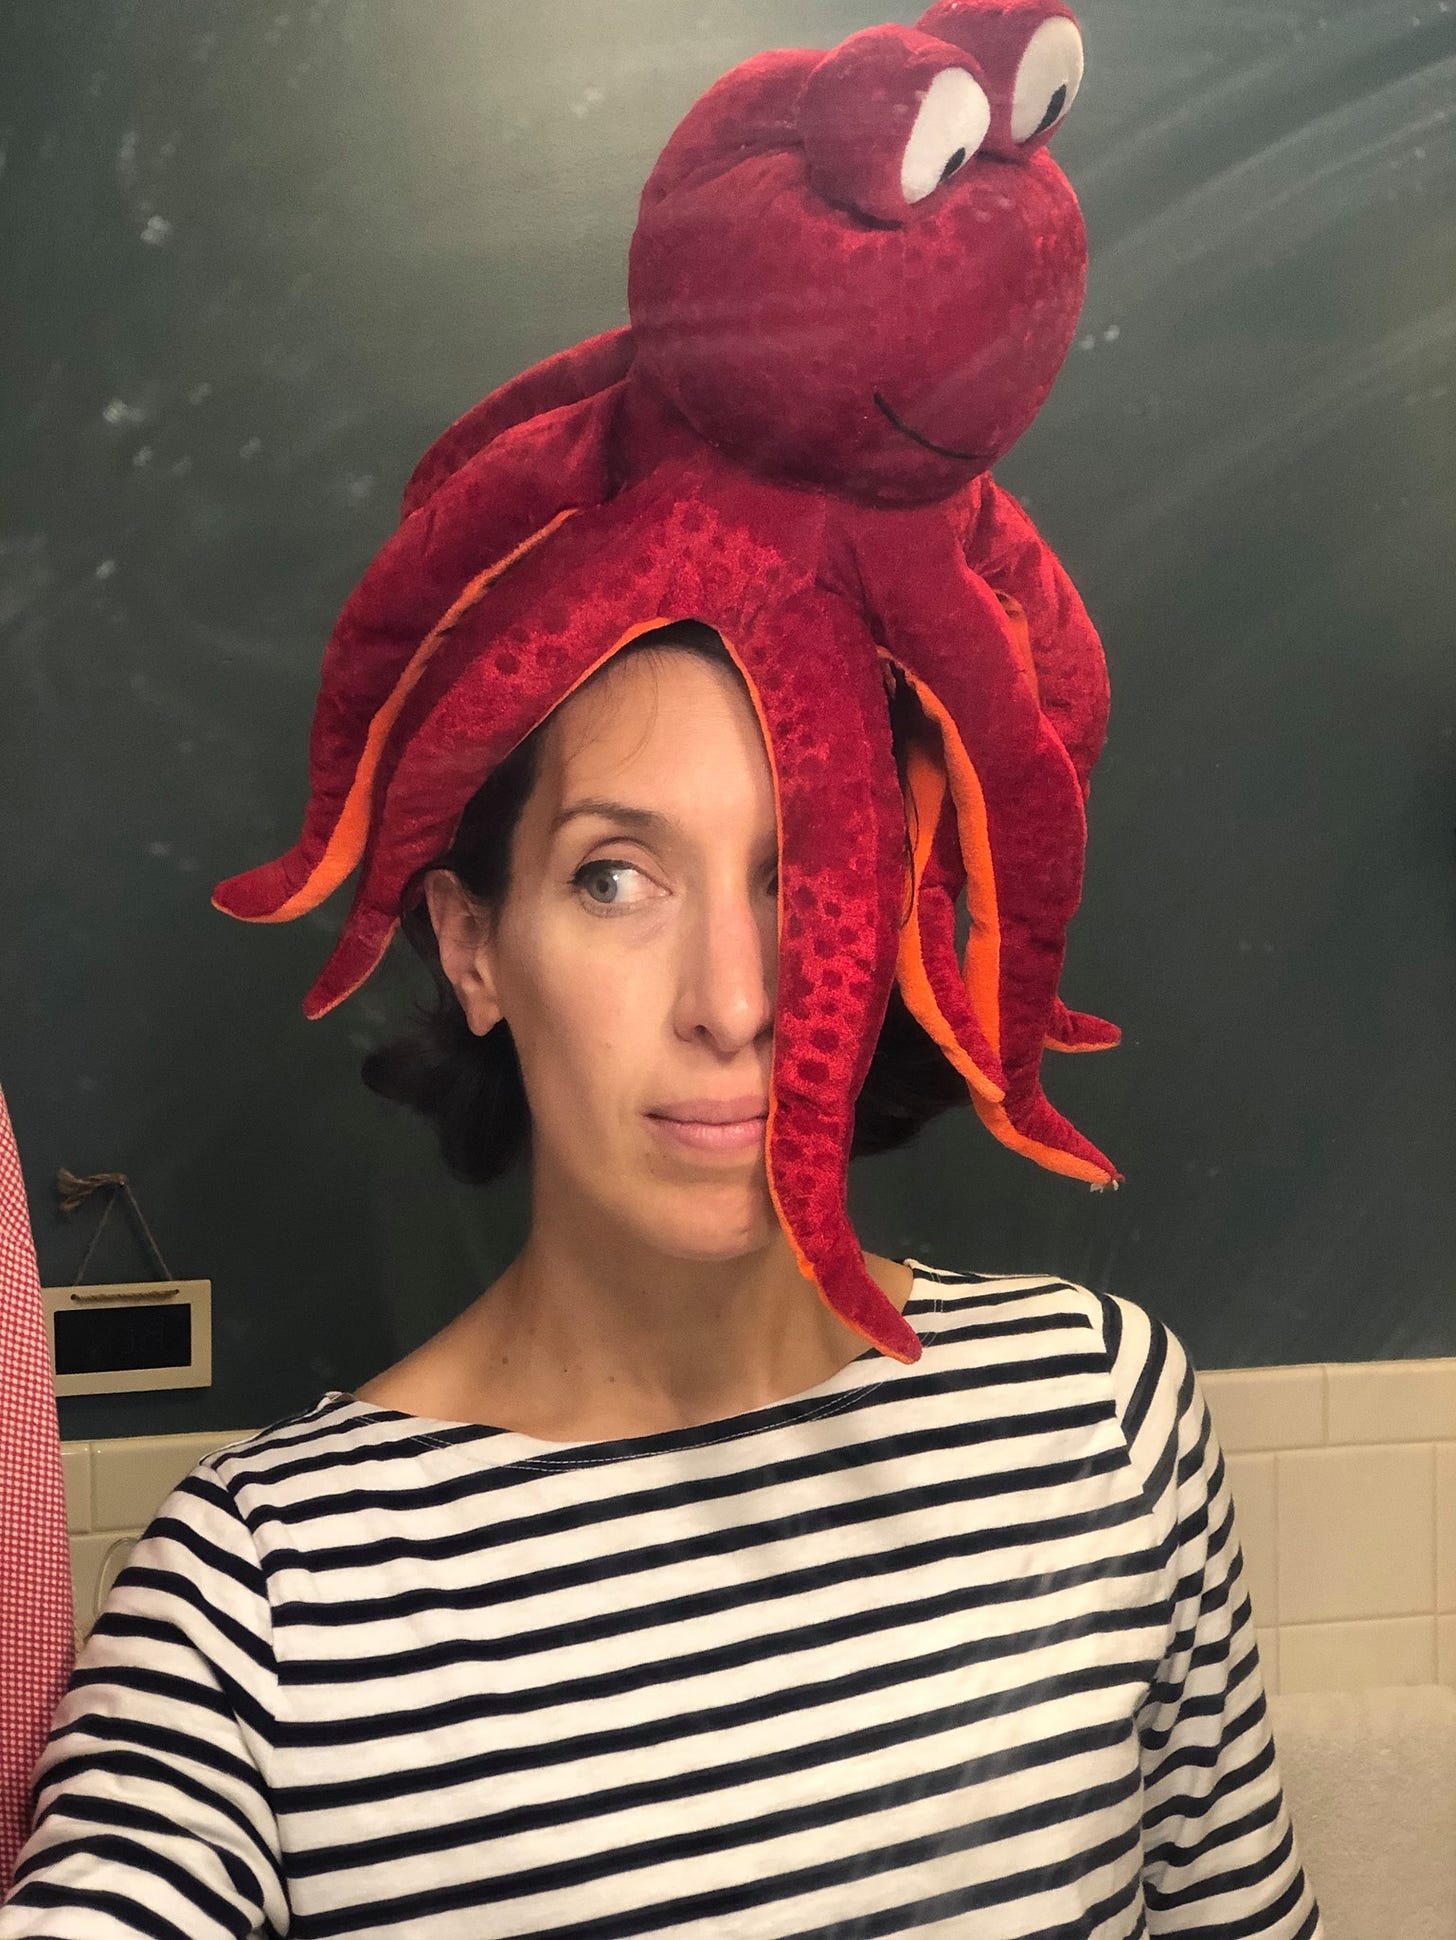 Raquel with some kind of cephalopod on her head